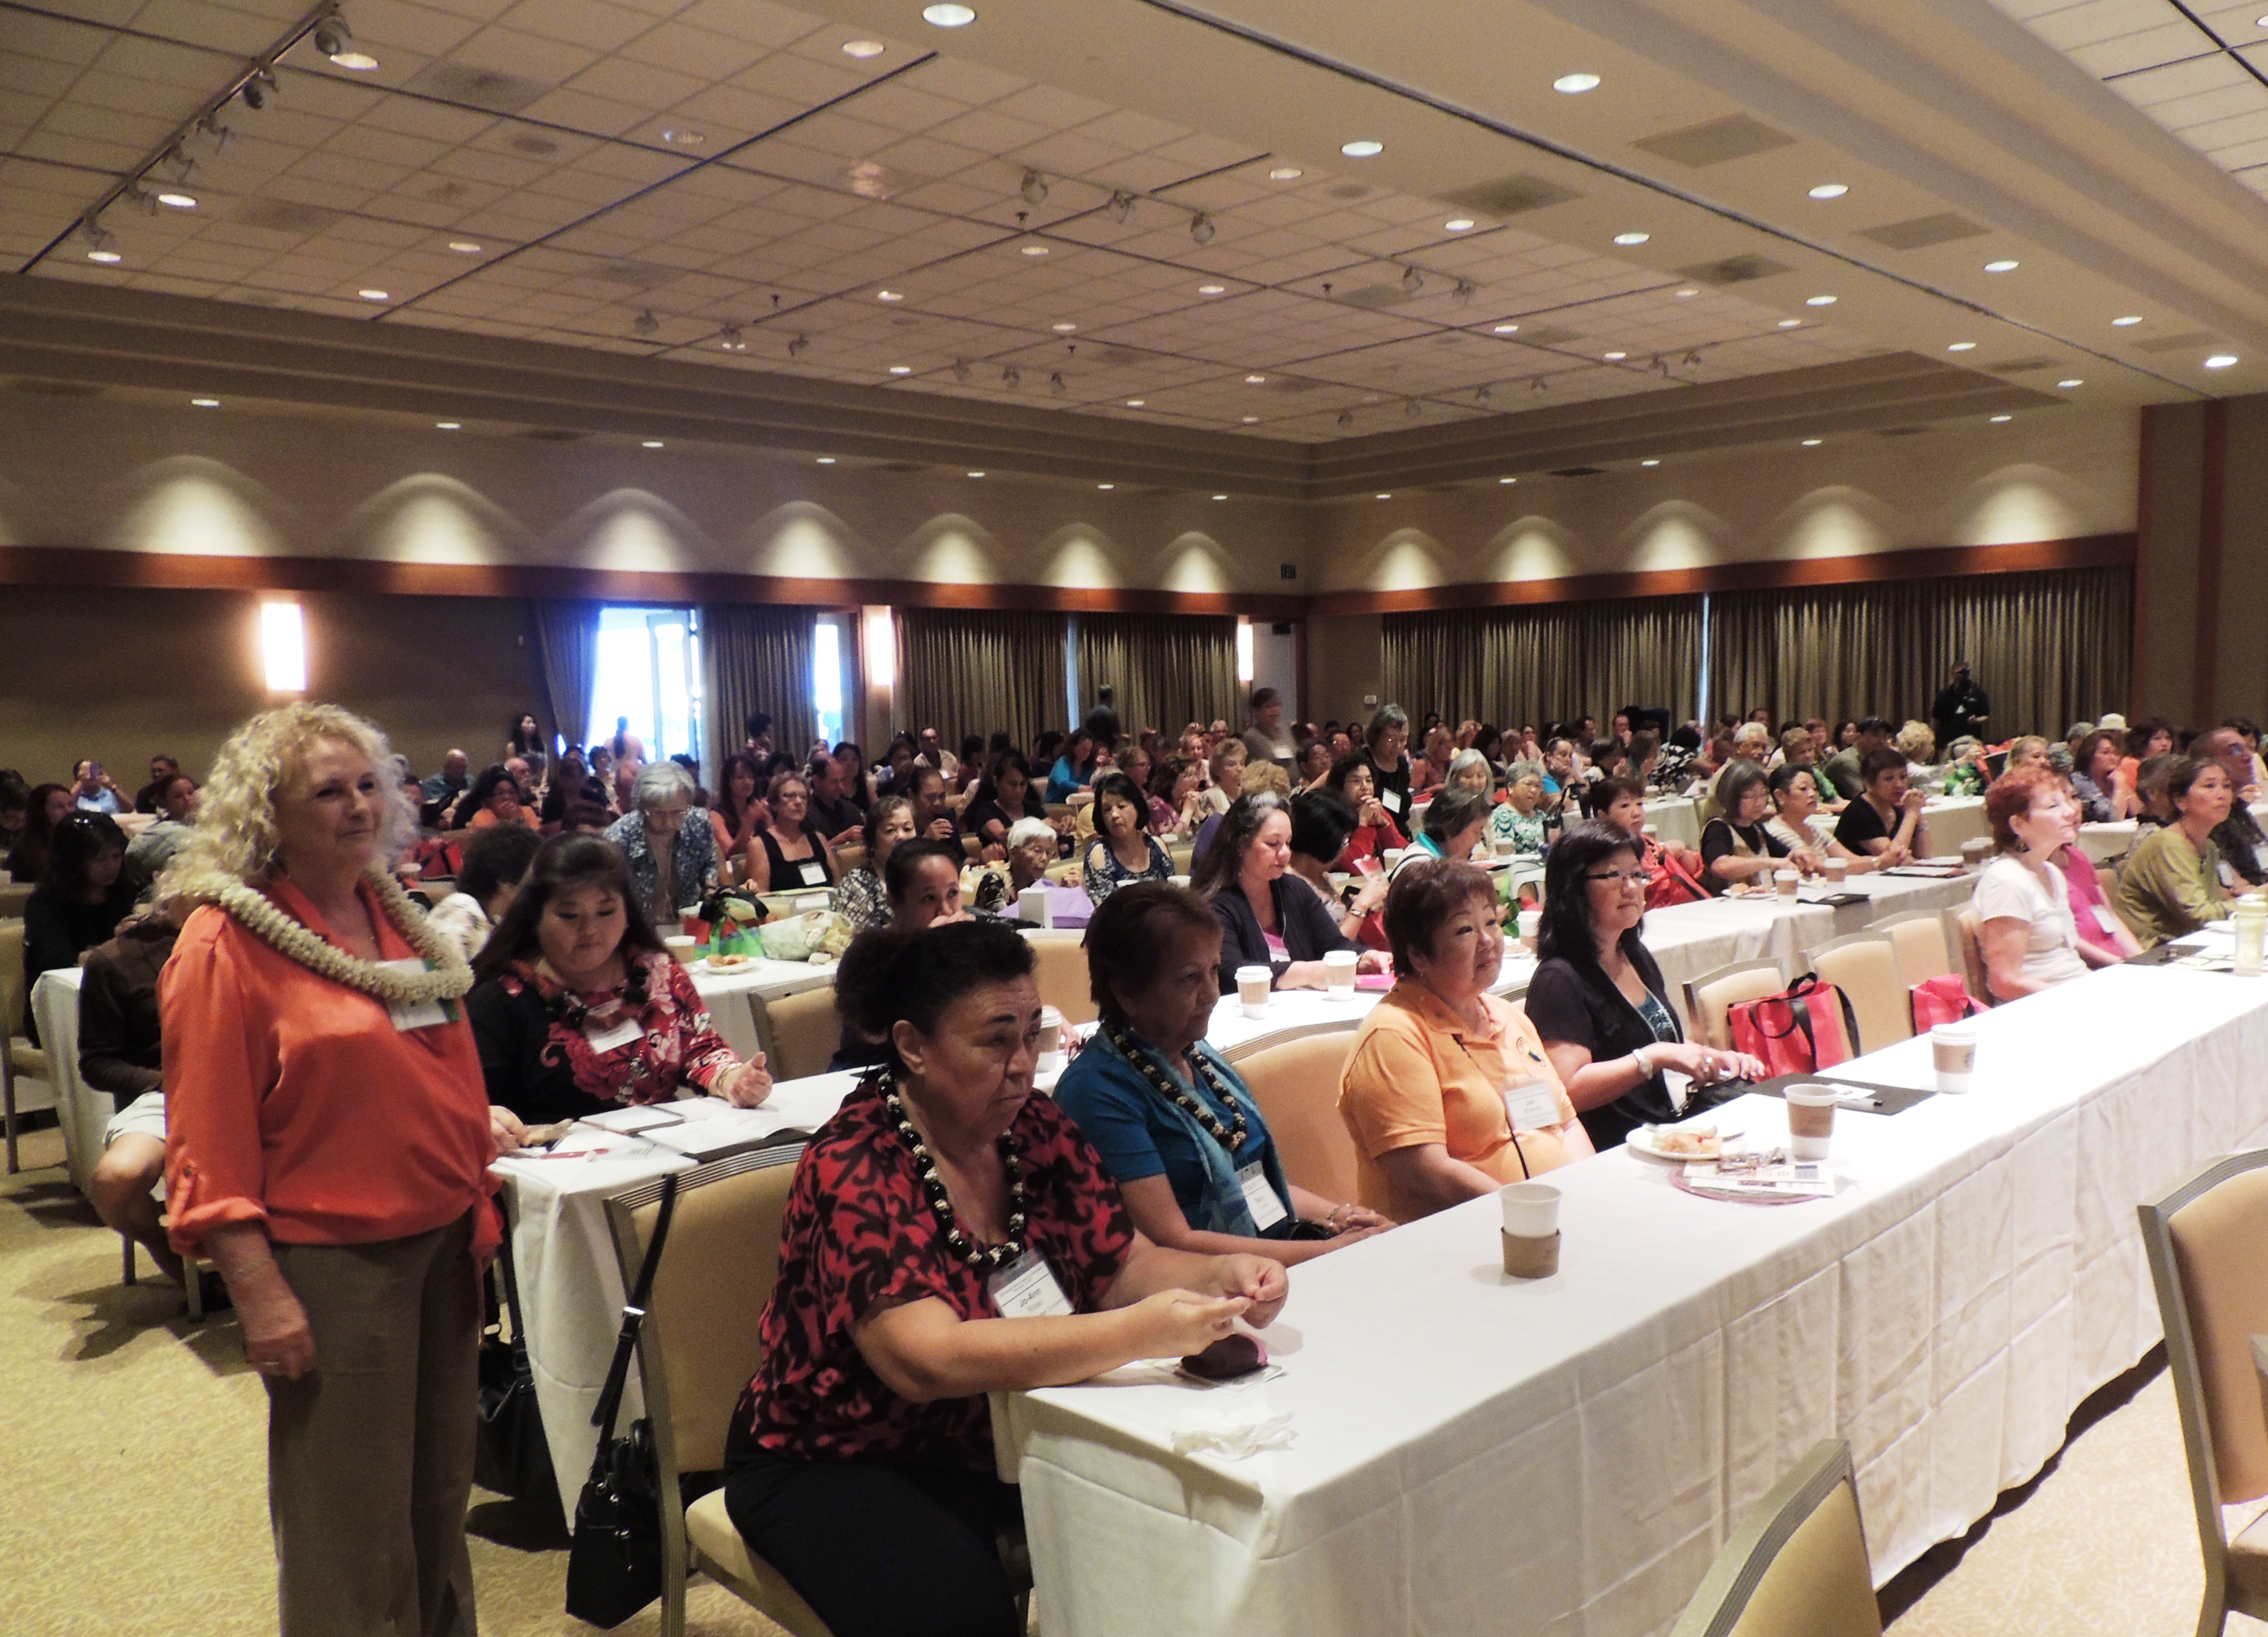 The 2014 Family Caregivers Conference drew a large audience of government officials, agency representatives and family caregivers. Photo credit County of Maui, Monica Morakis.